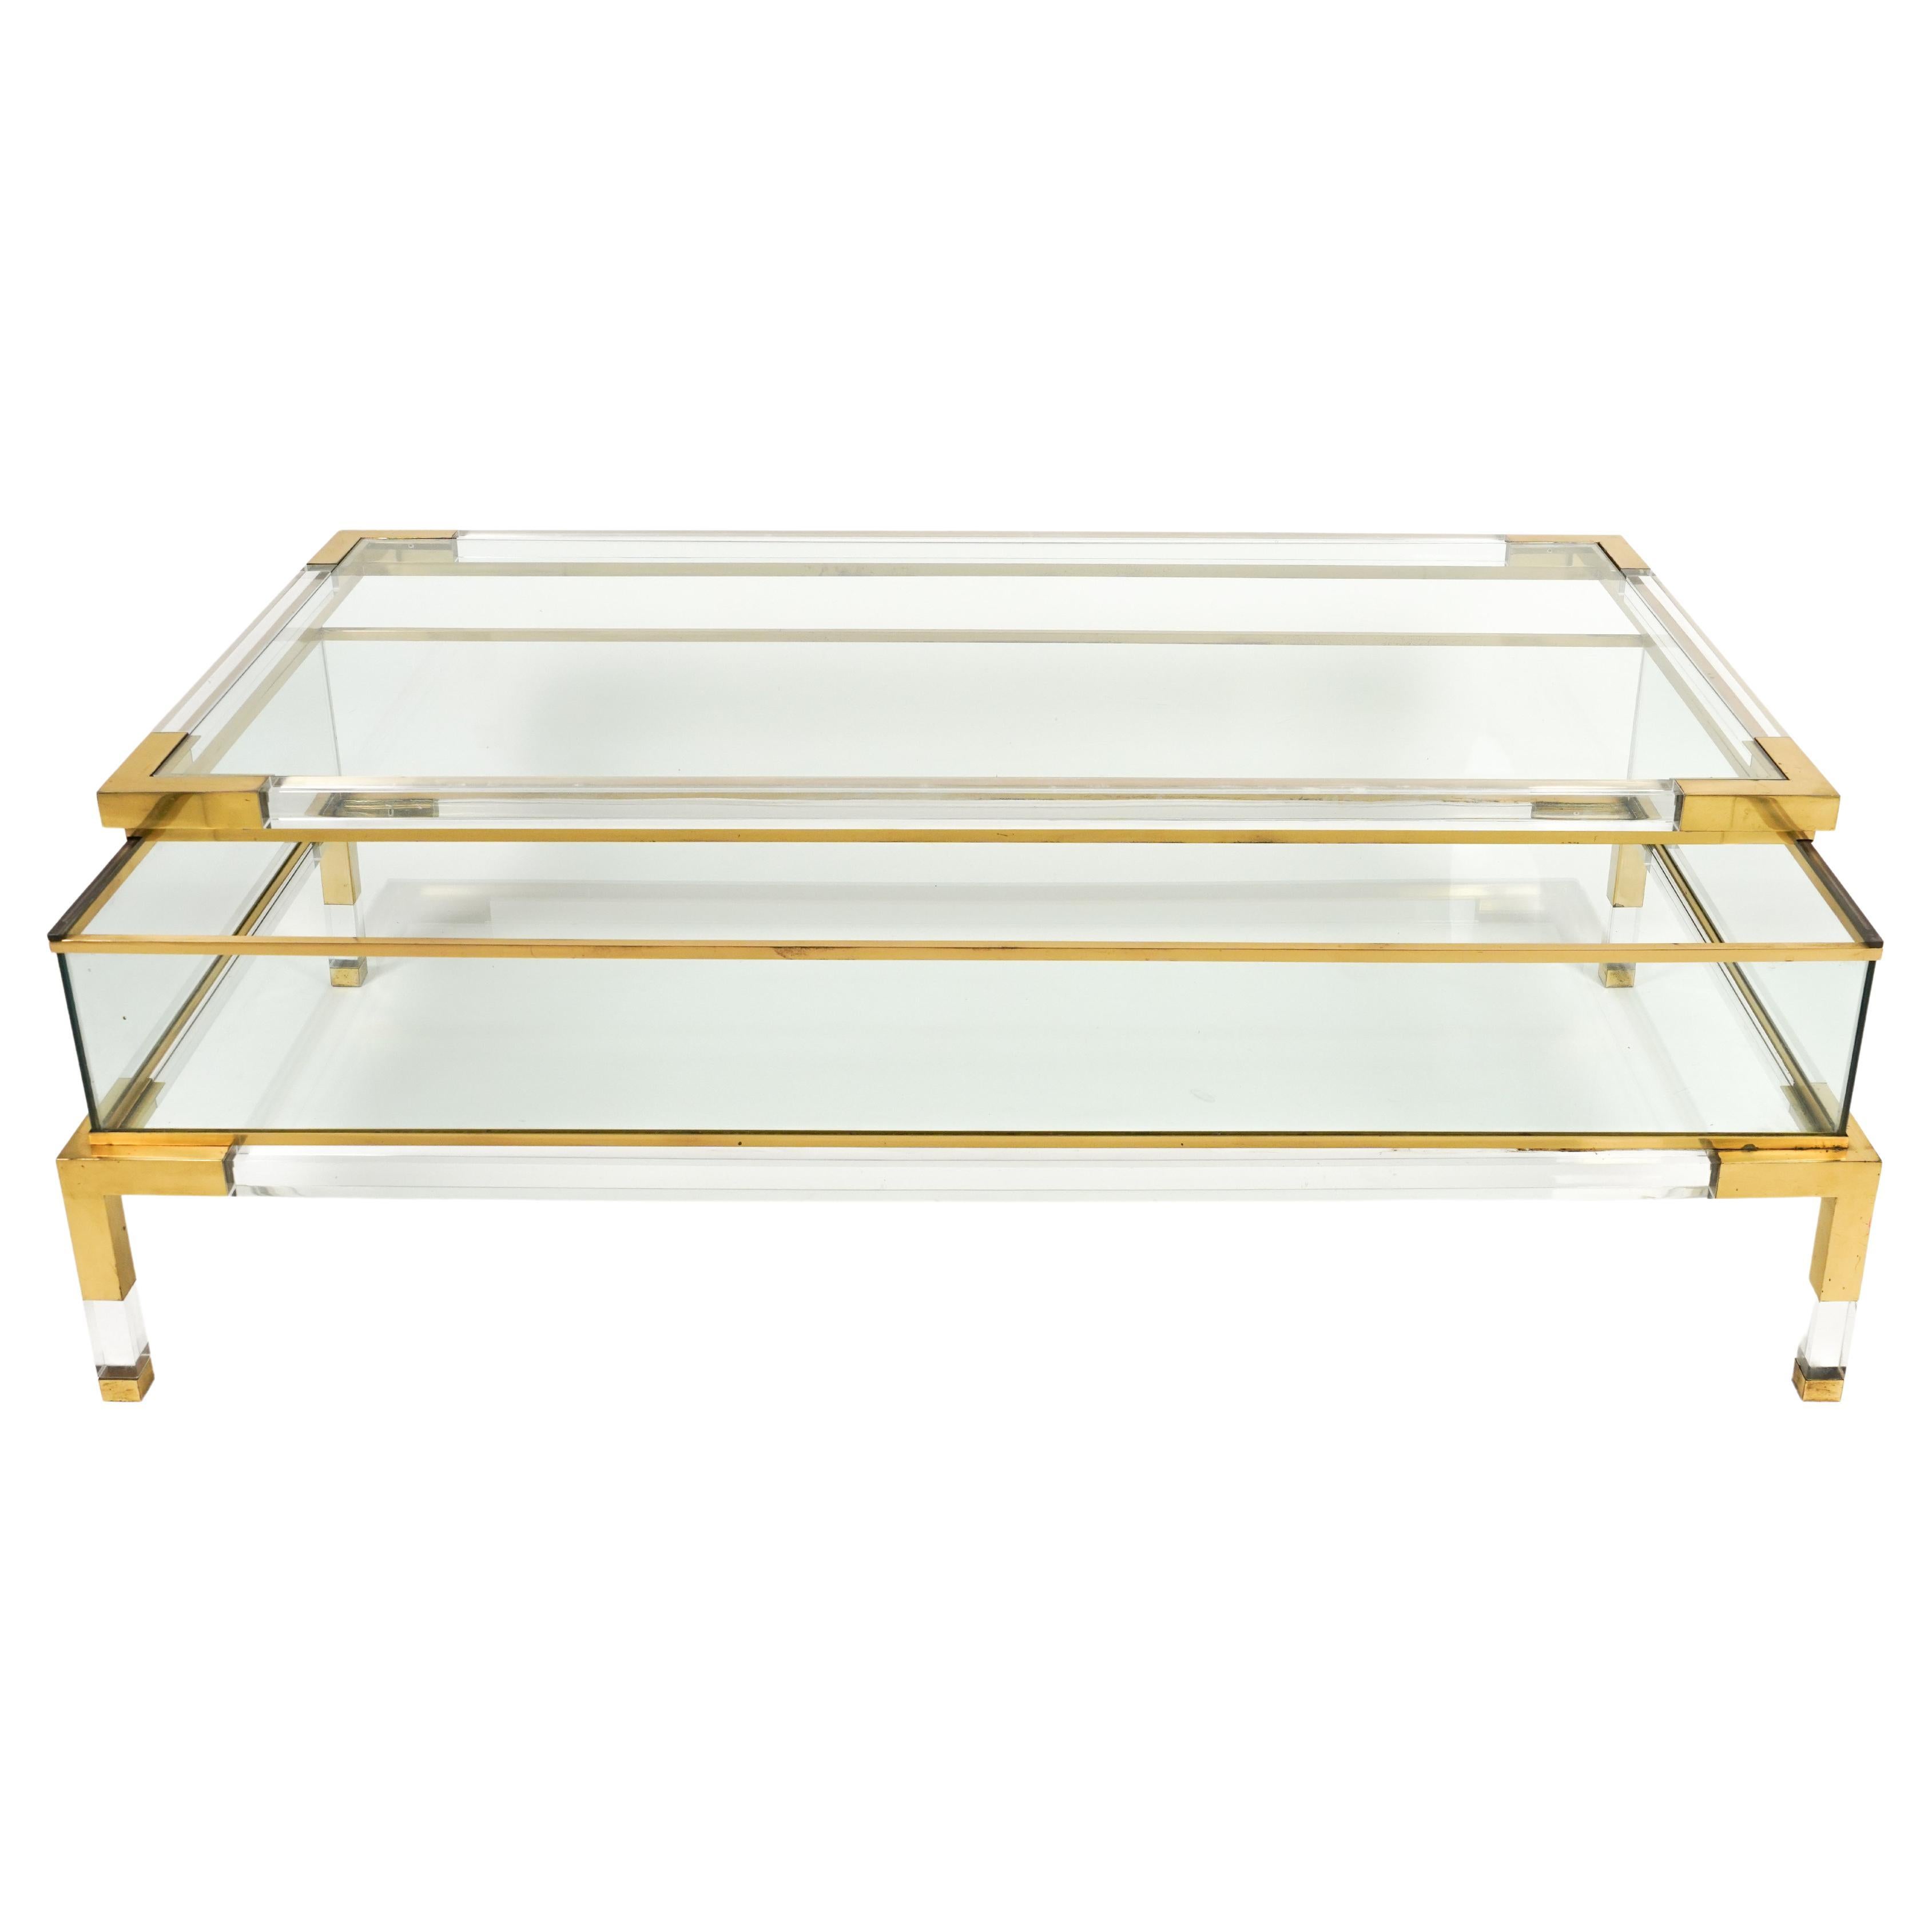 Midcentury Coffee Table in Lucite, Brass & Glass by Maison Jansen, France 1970s For Sale